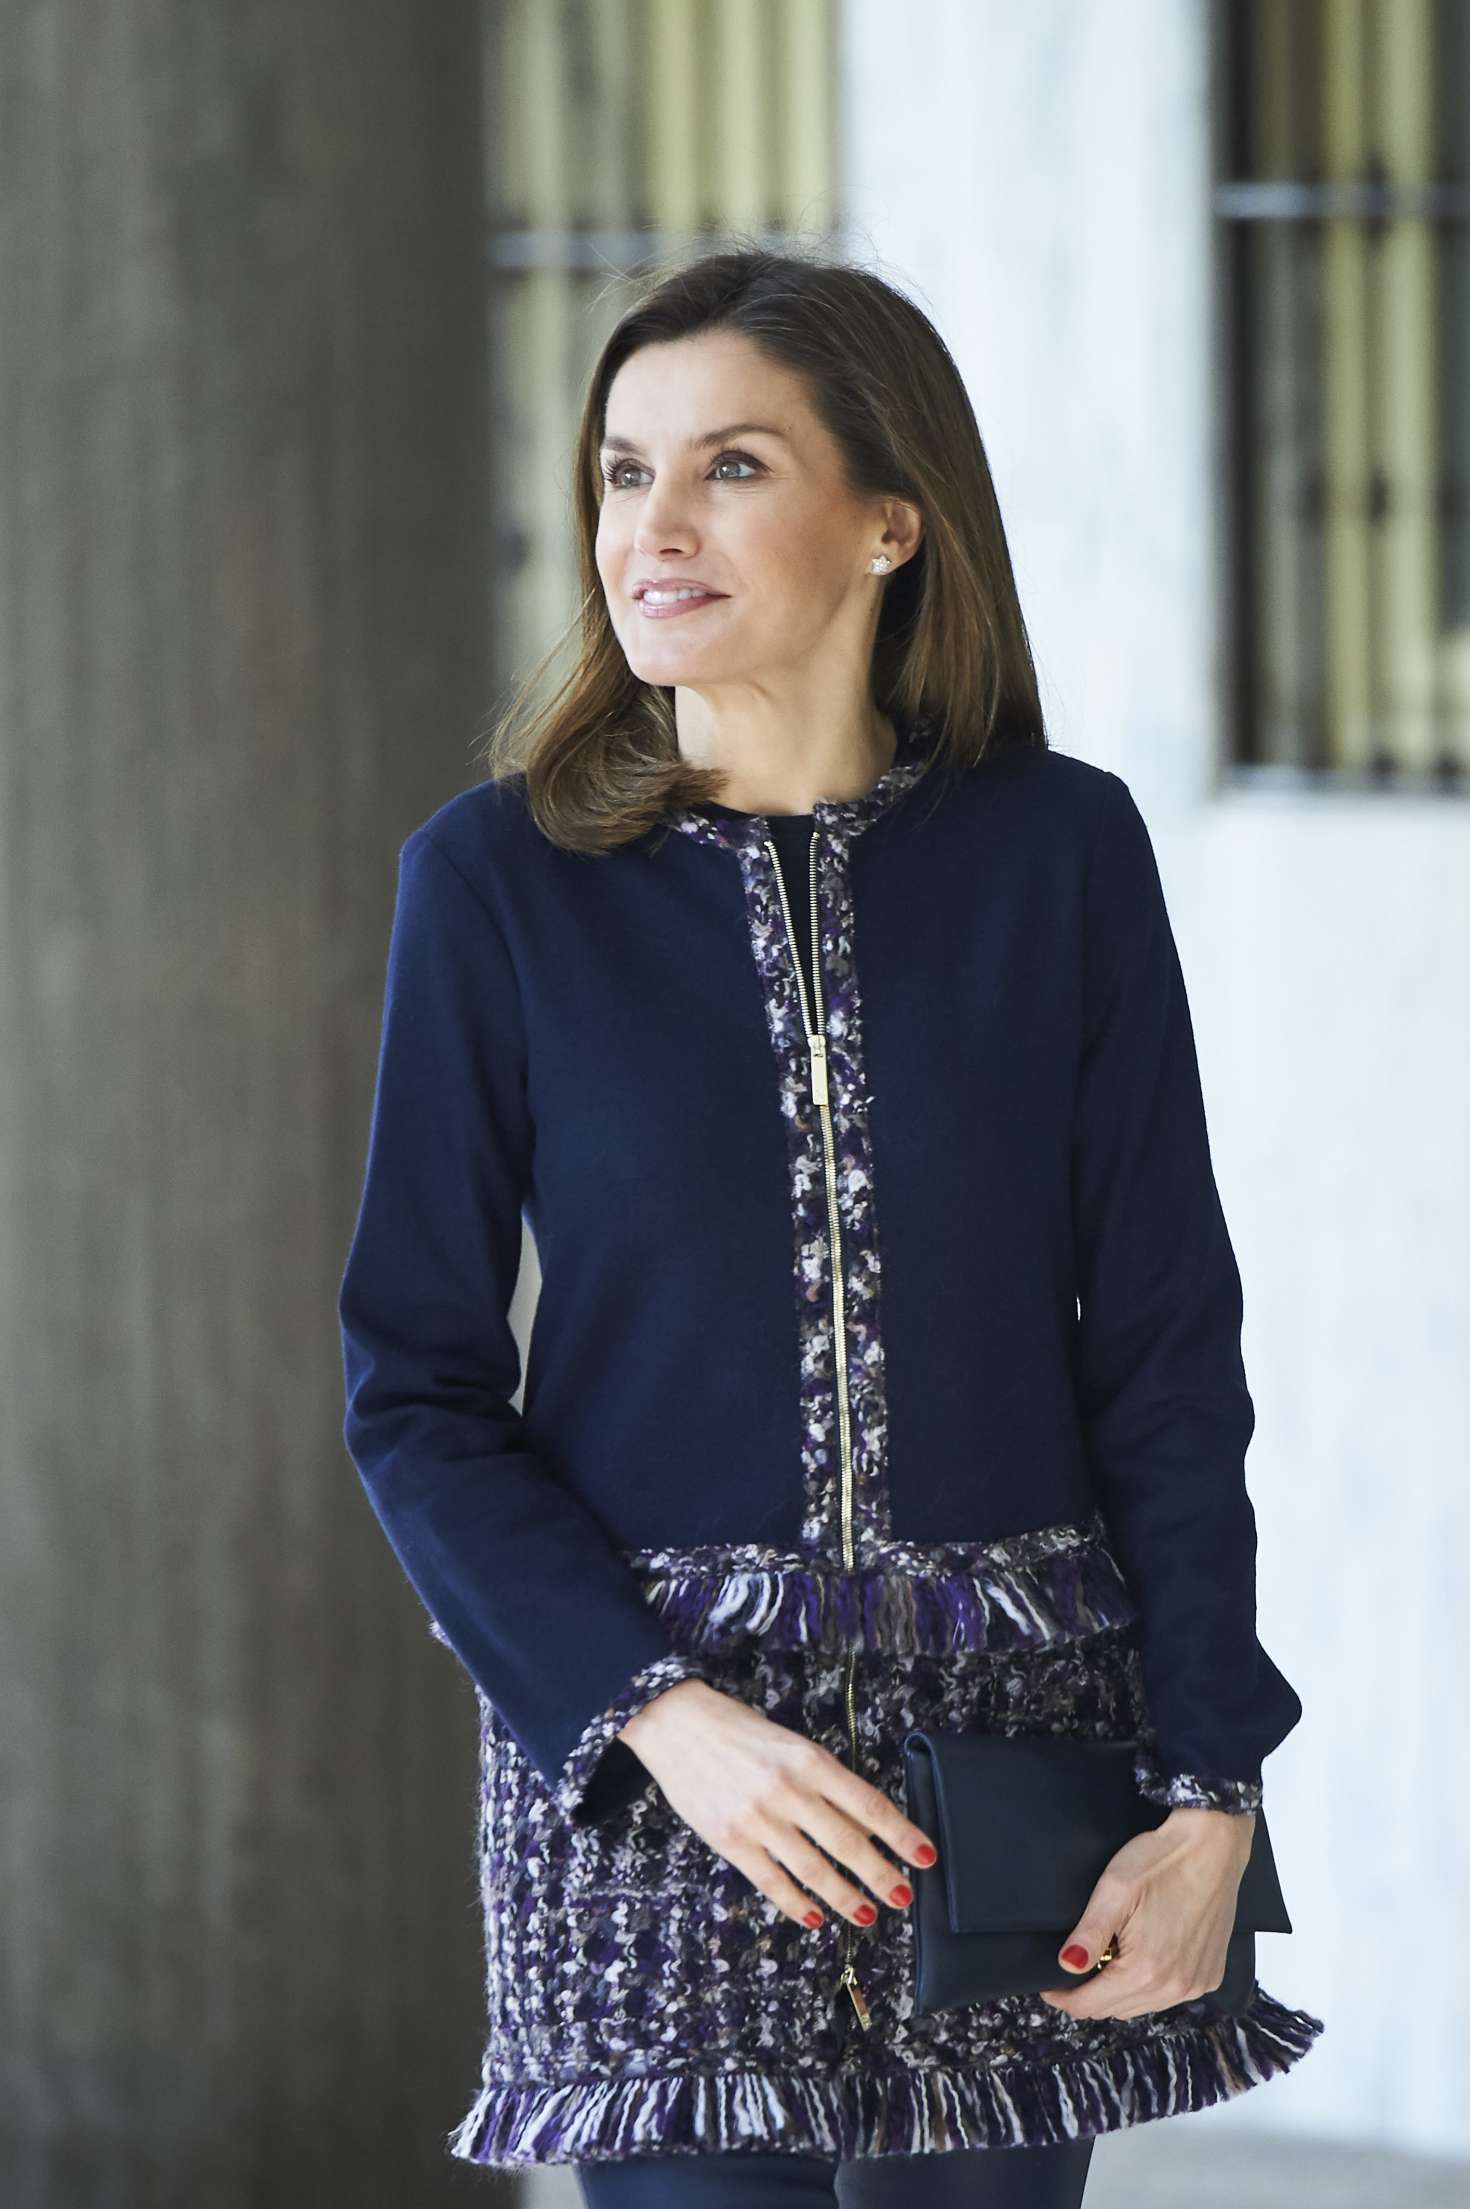 Queen Letizia: Heading to a meeting in Madrid -02 | GotCeleb